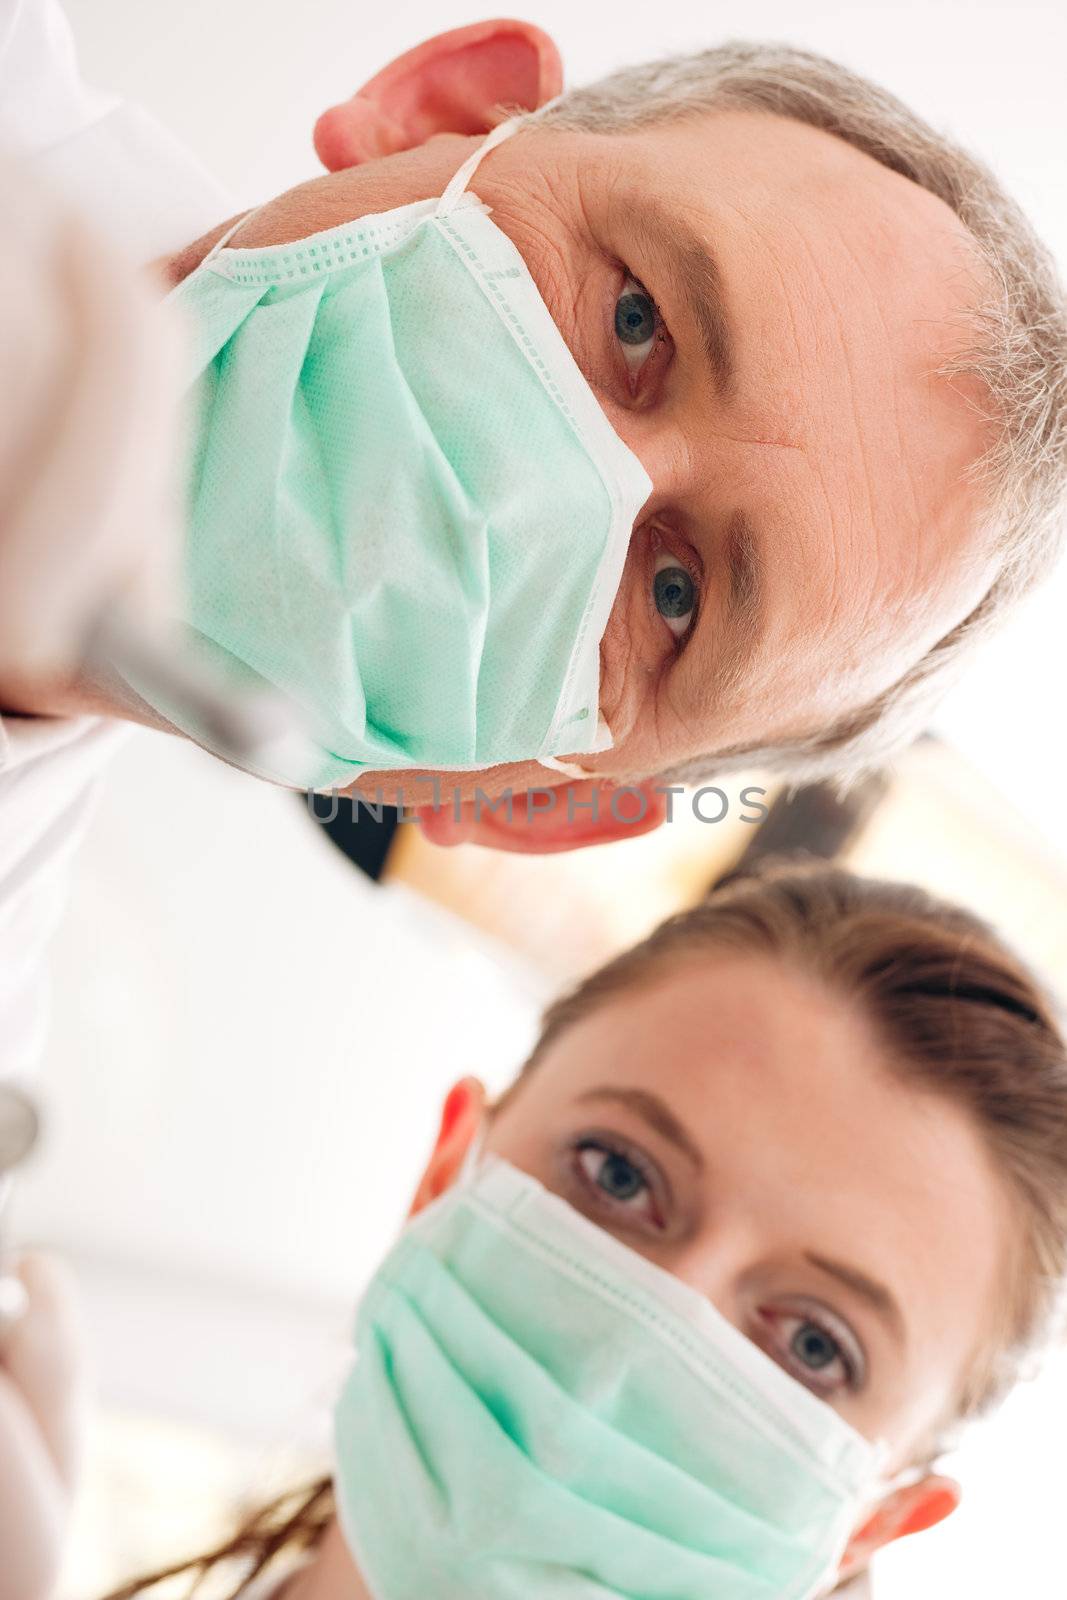 Dental treatment with dentist and dental assistant bowing over the patient as seen from patient's perspective.